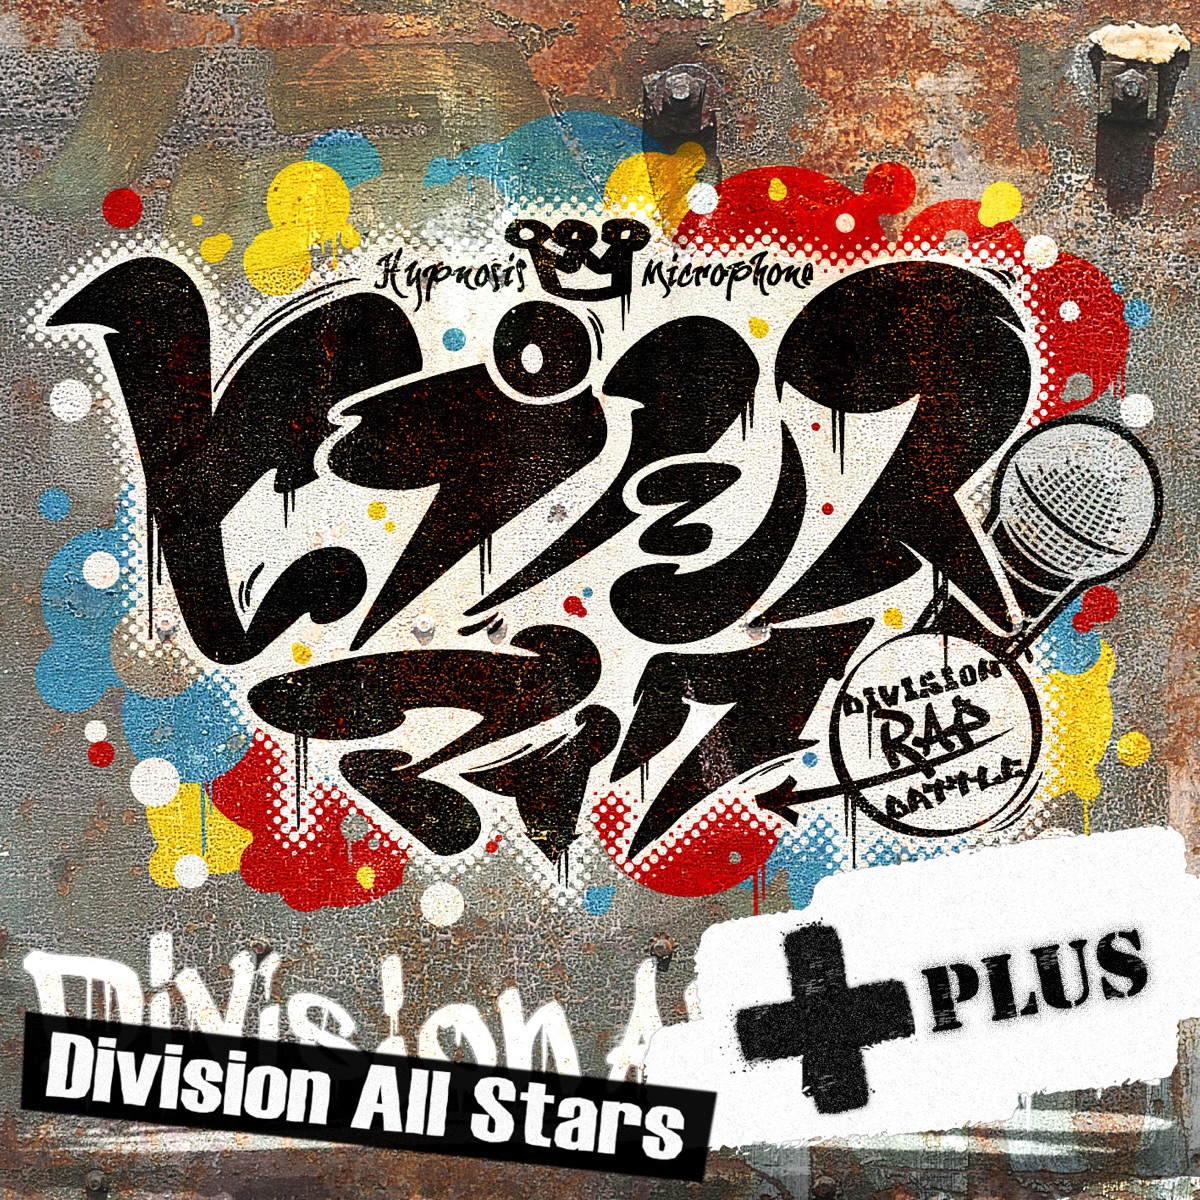 Cover art for『Division All Stars - Hypnosis Mic -Division Rap Battle- +』from the release『Division All Stars - HypnosisMic Divisoin Rap Battle +』